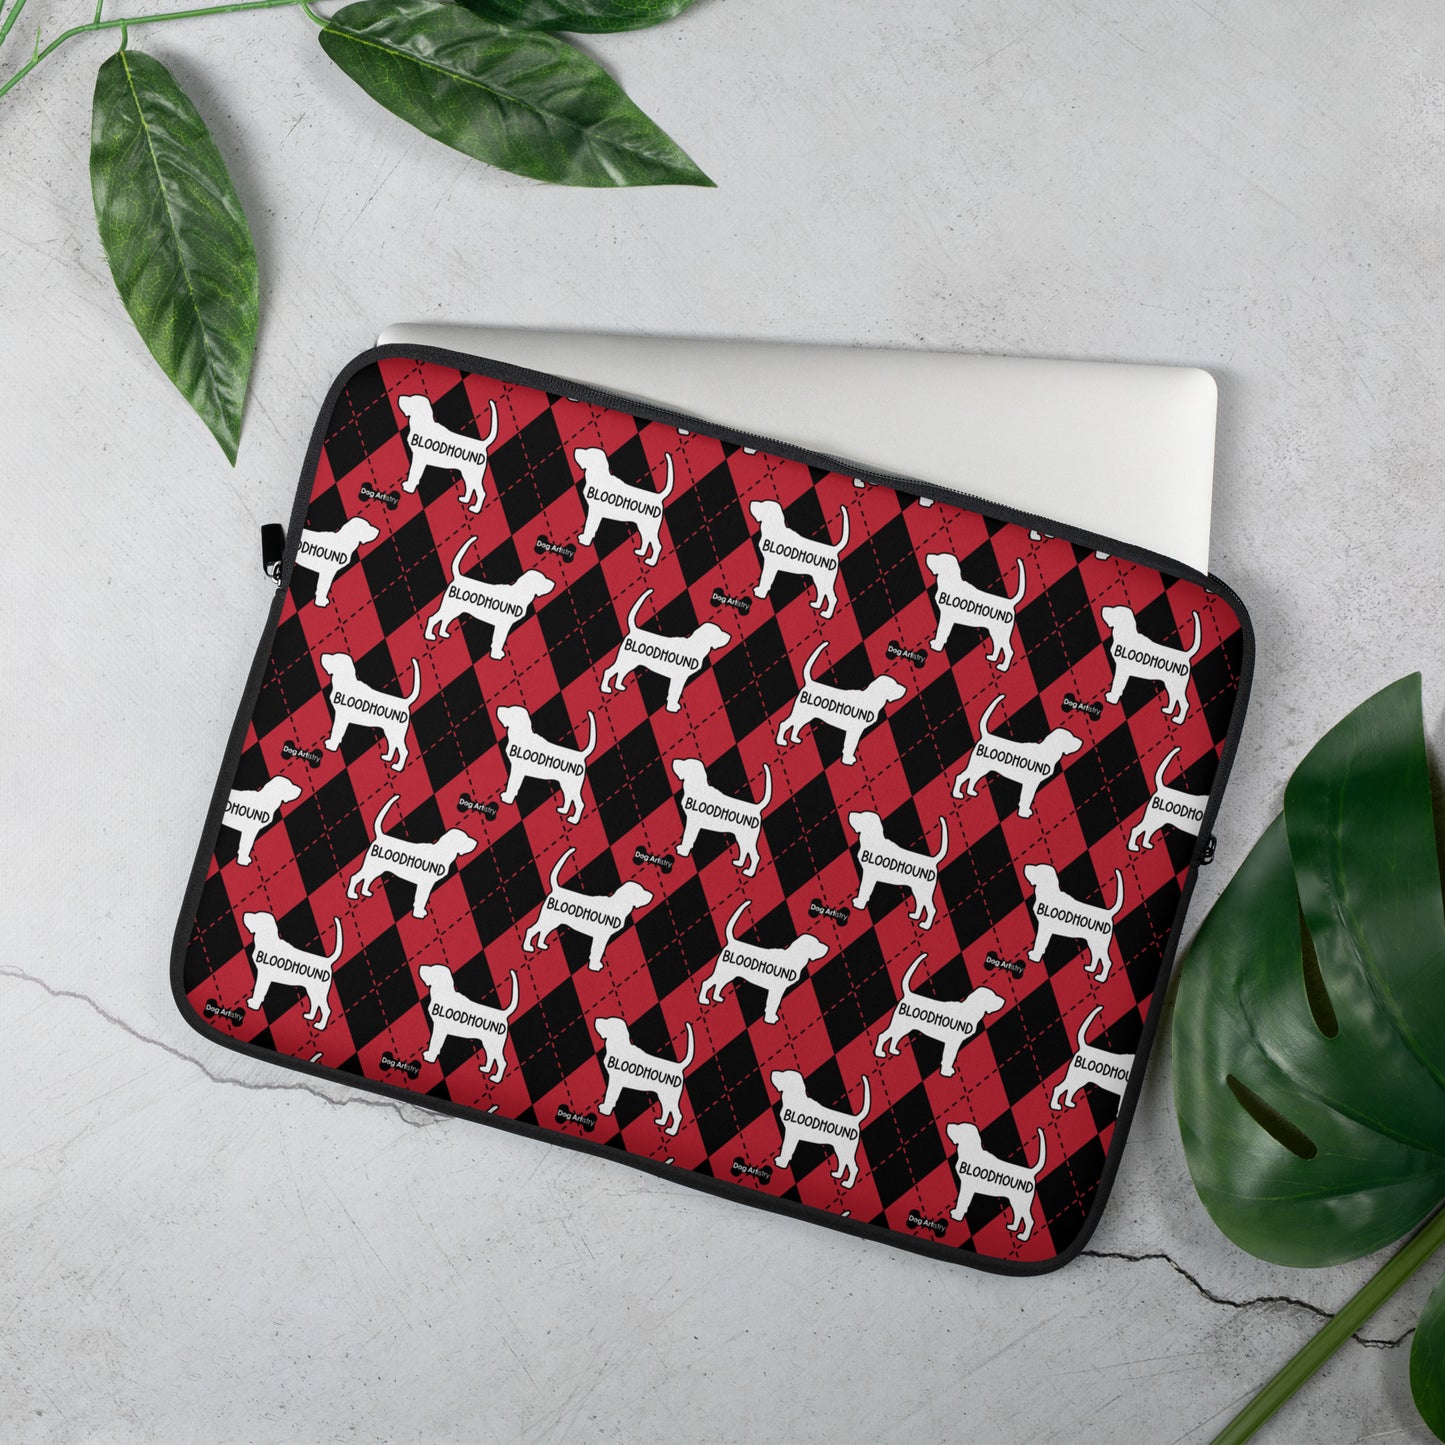 Bloodhound red and black argyle laptop sleeve by Dog Artistry